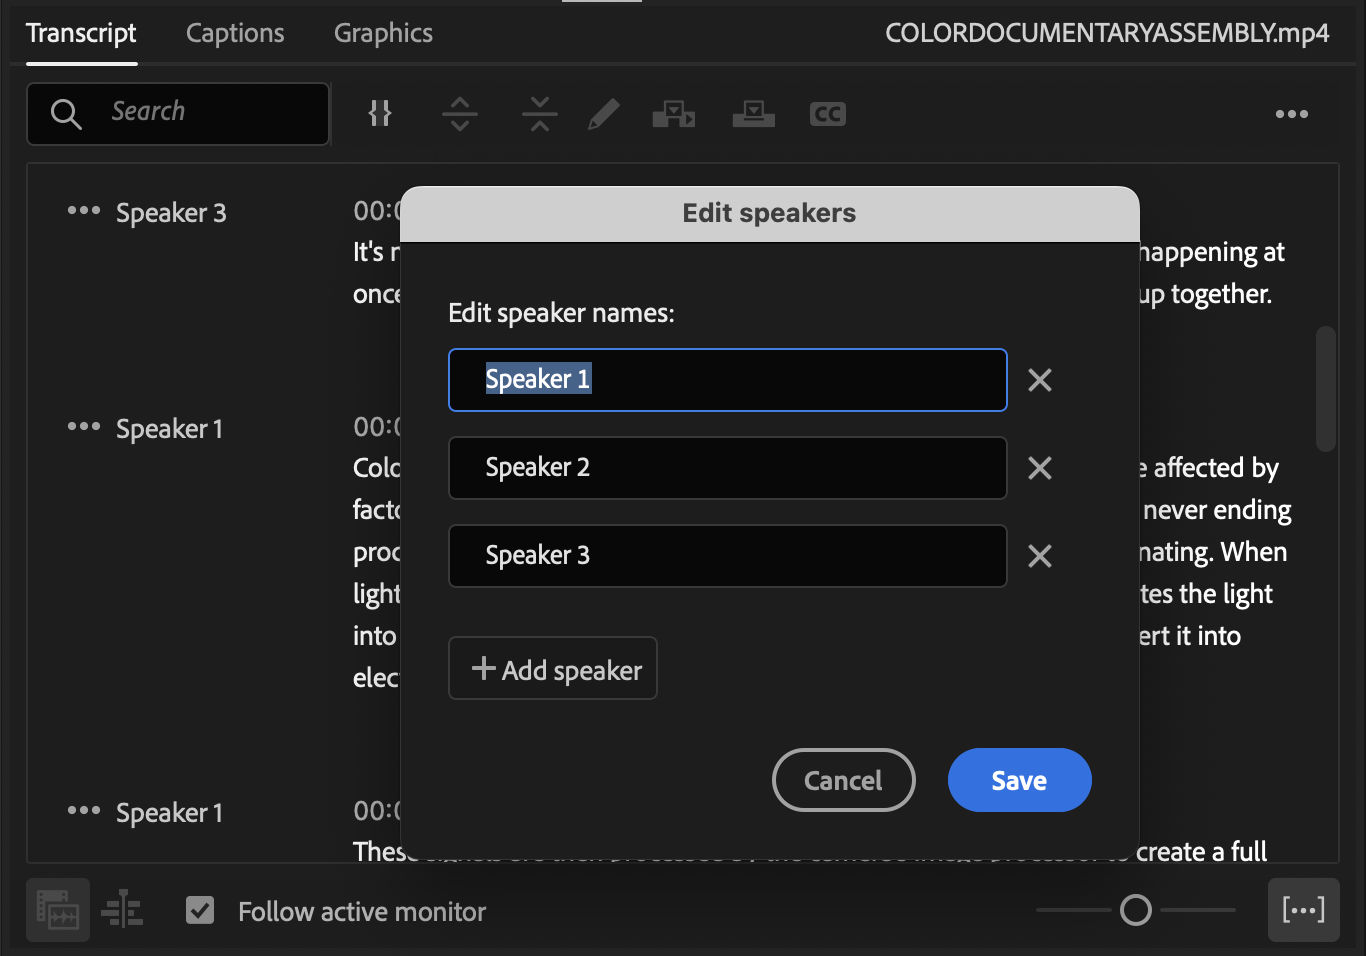 UI of Edit speakers, where you can add the speaker names and choose save.